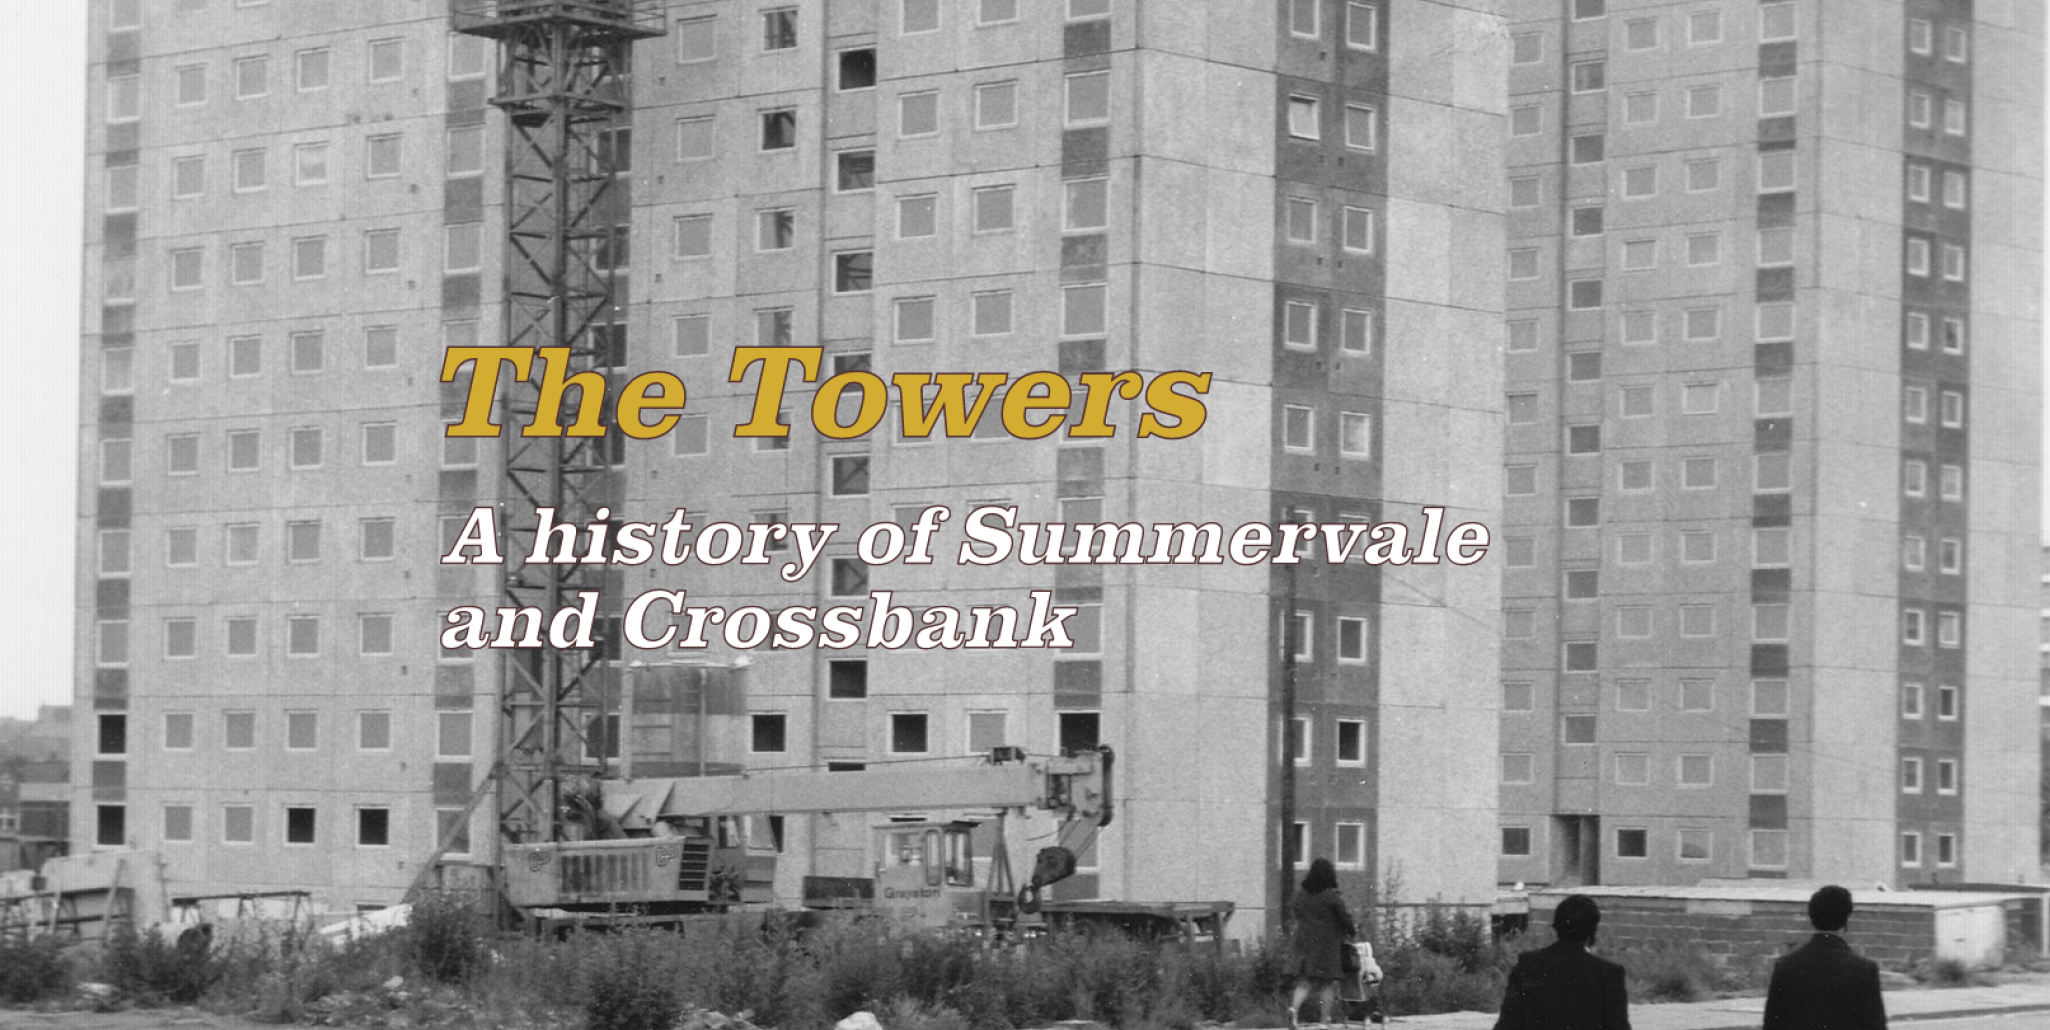 A black and white image showing the towers being constructed, with mustard yellow and white text on it reading 'The Towers' and 'A history of Summervale and Crossbank'